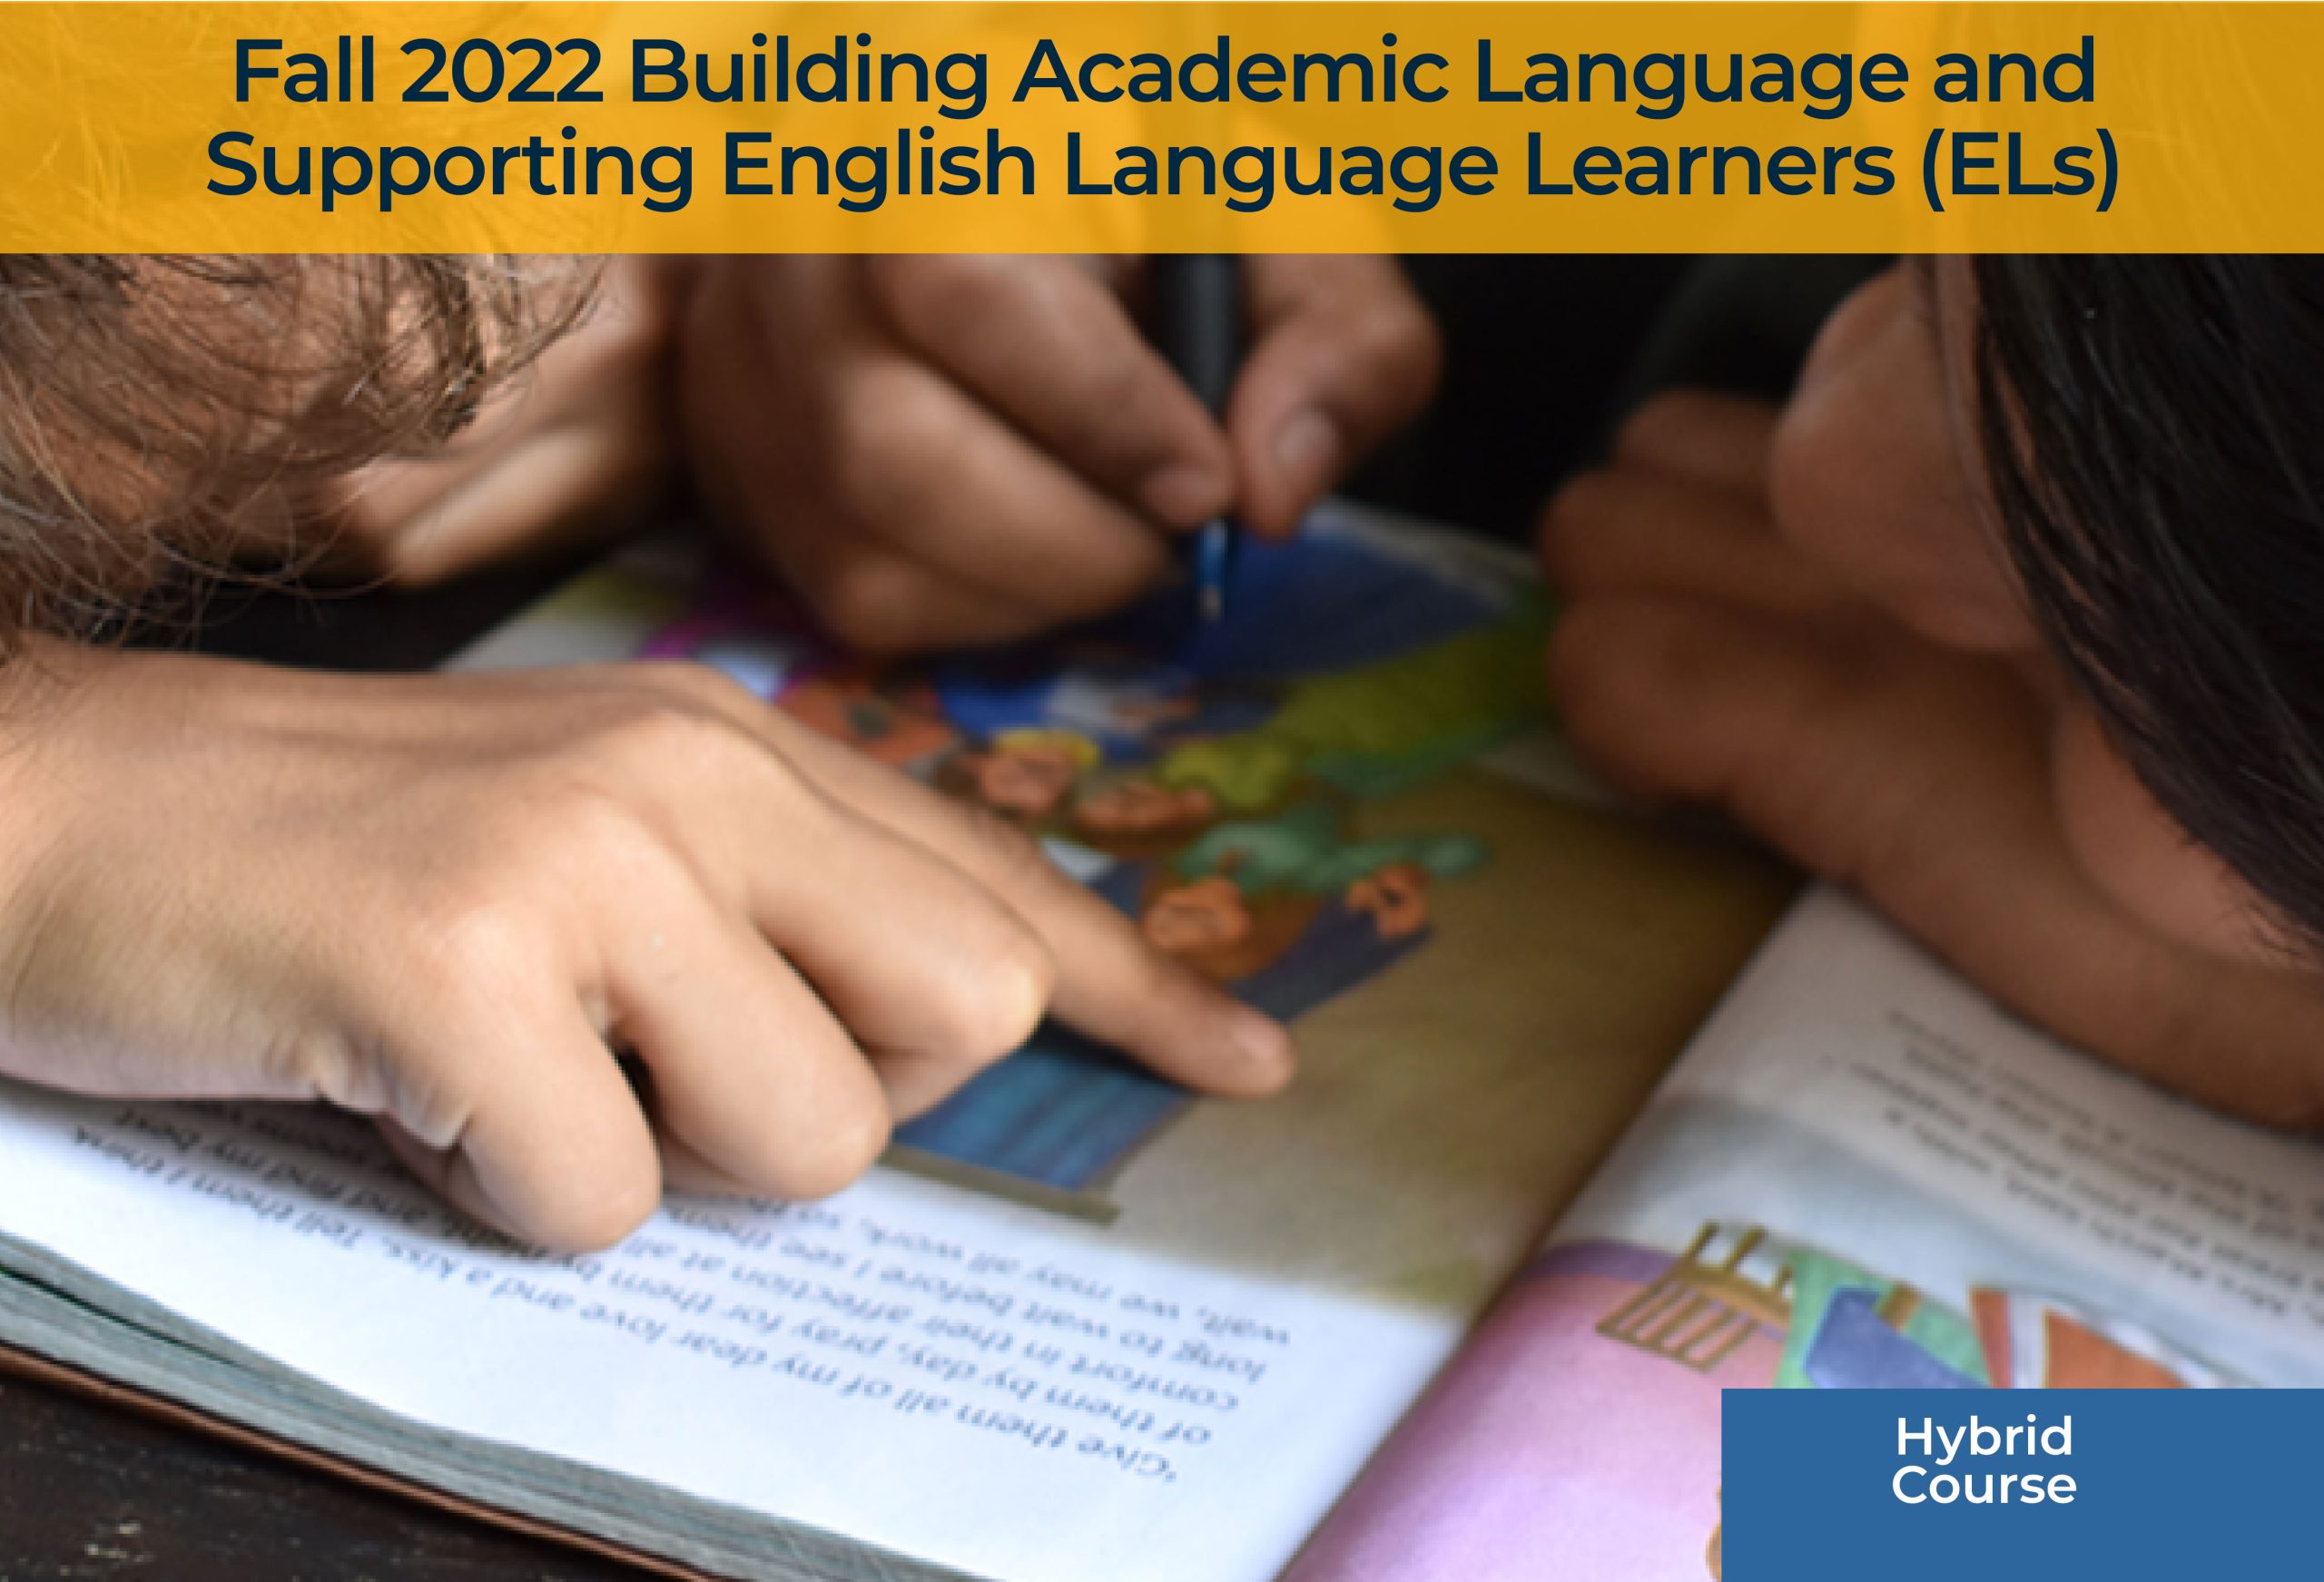 Building Academic Language and Supporting English Learners (ELs)